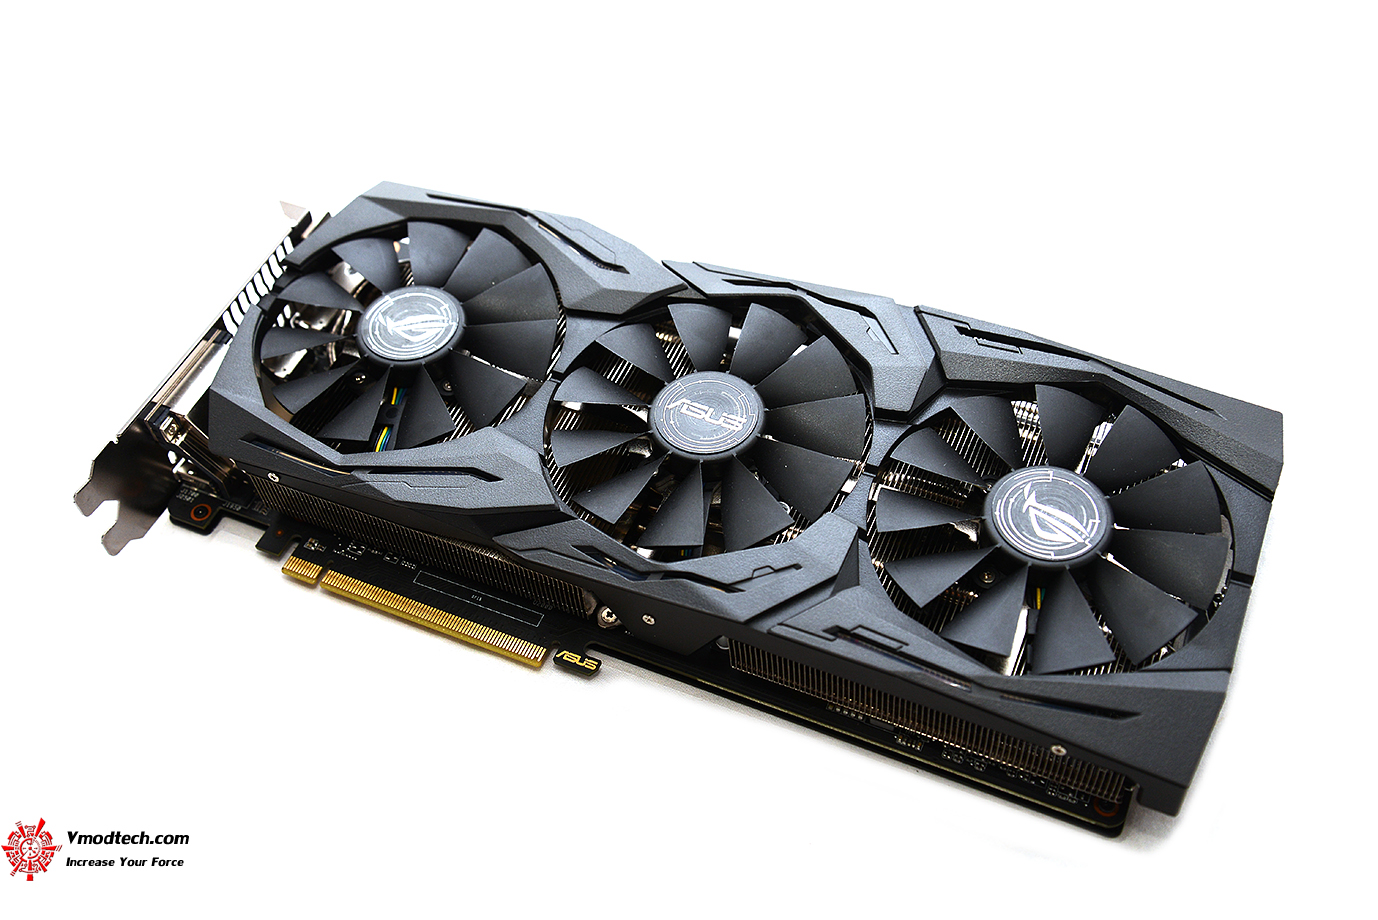 dsc 2360 ASUS ROG STRIX RX480 8G GAMING REVIEW